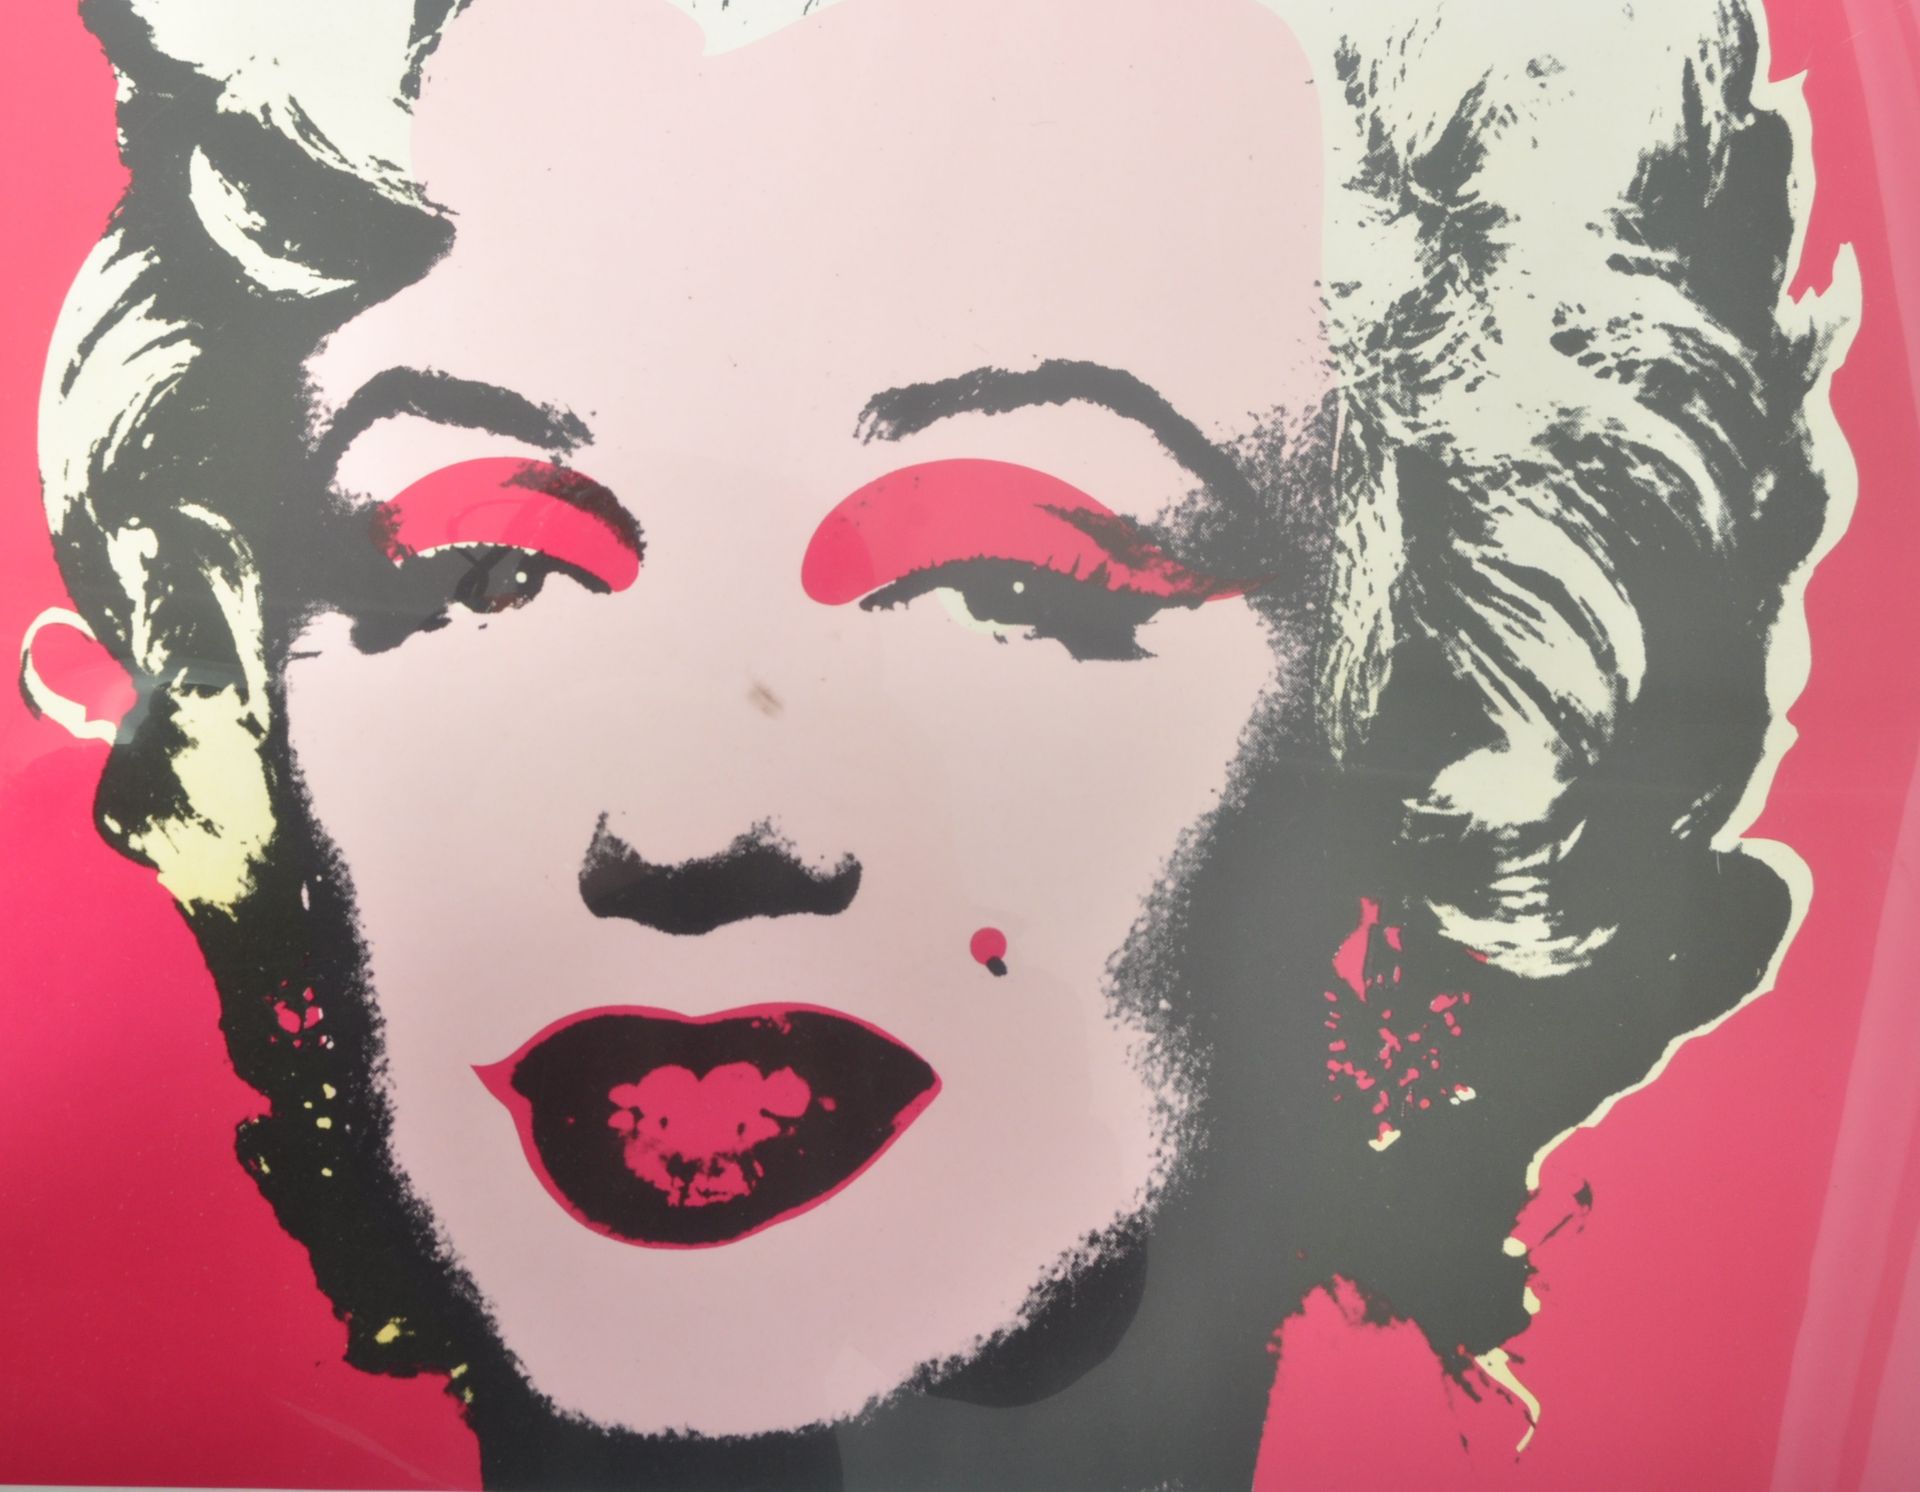 AFTER ANDY WARHOL - 1967 TATE GALLERY POSTER - Image 2 of 3